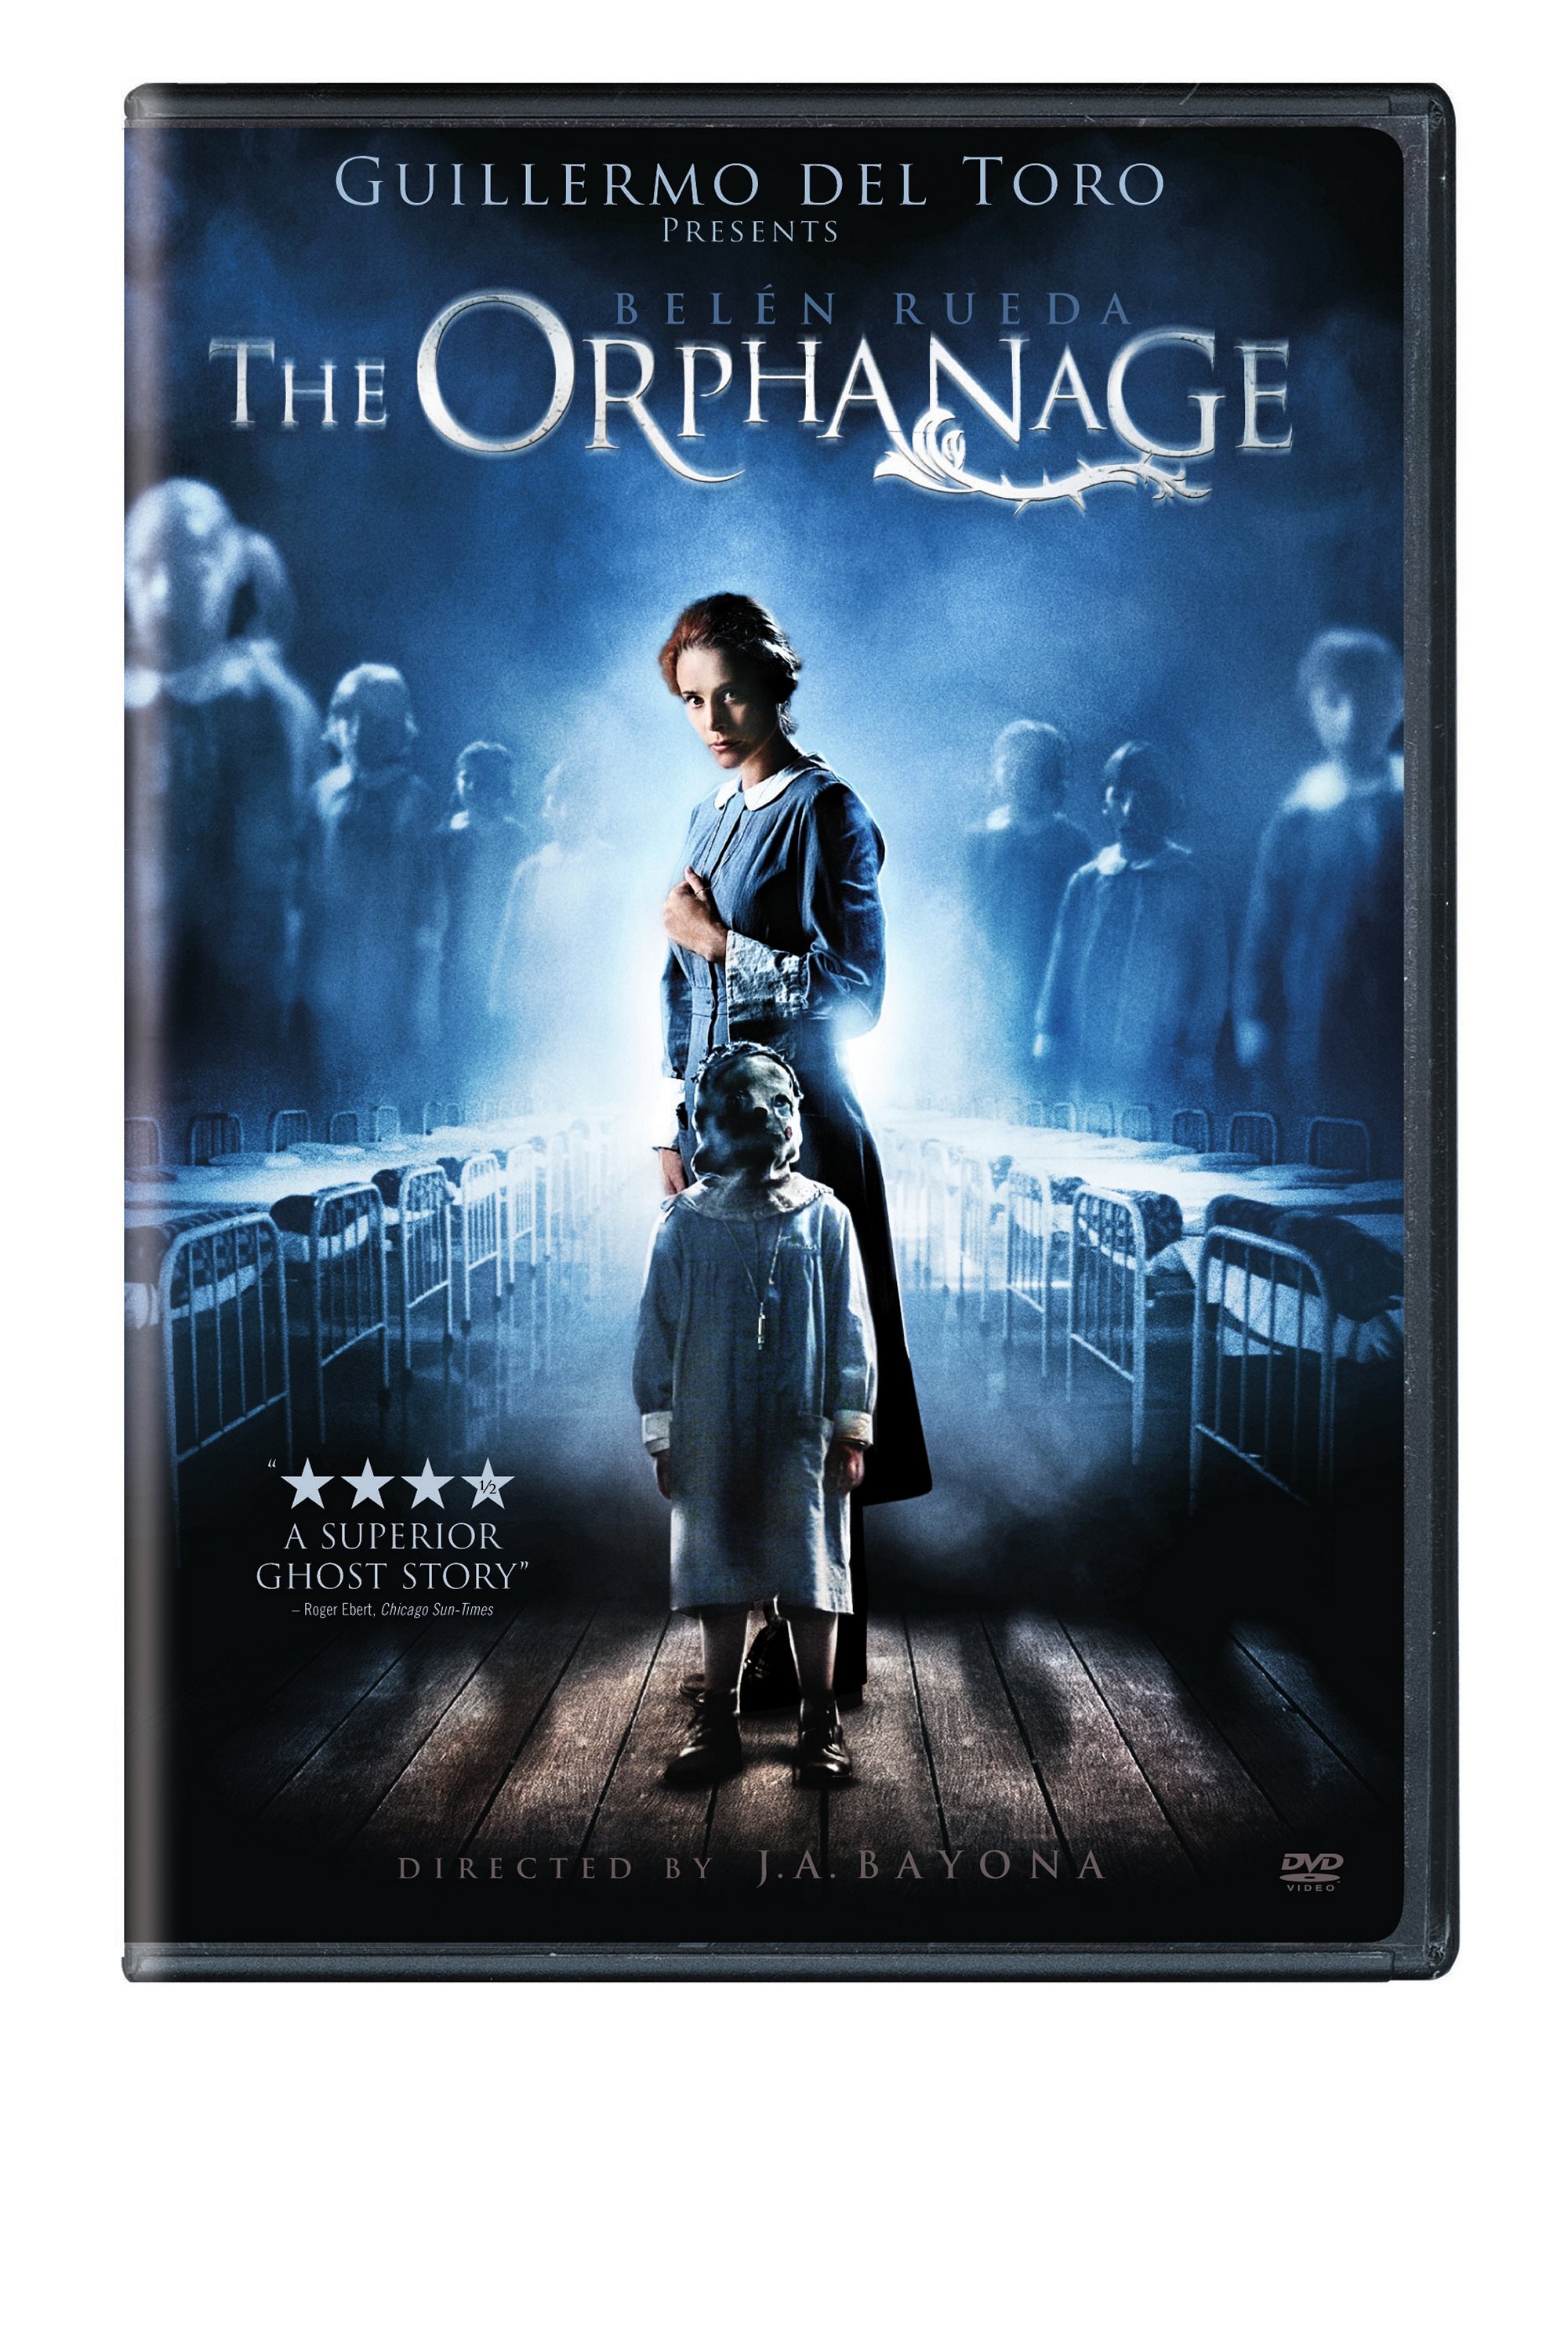 The Orphanage (DVD Widescreen) - DVD [ 2007 ]  - Foreign Movies On DVD - Movies On GRUV